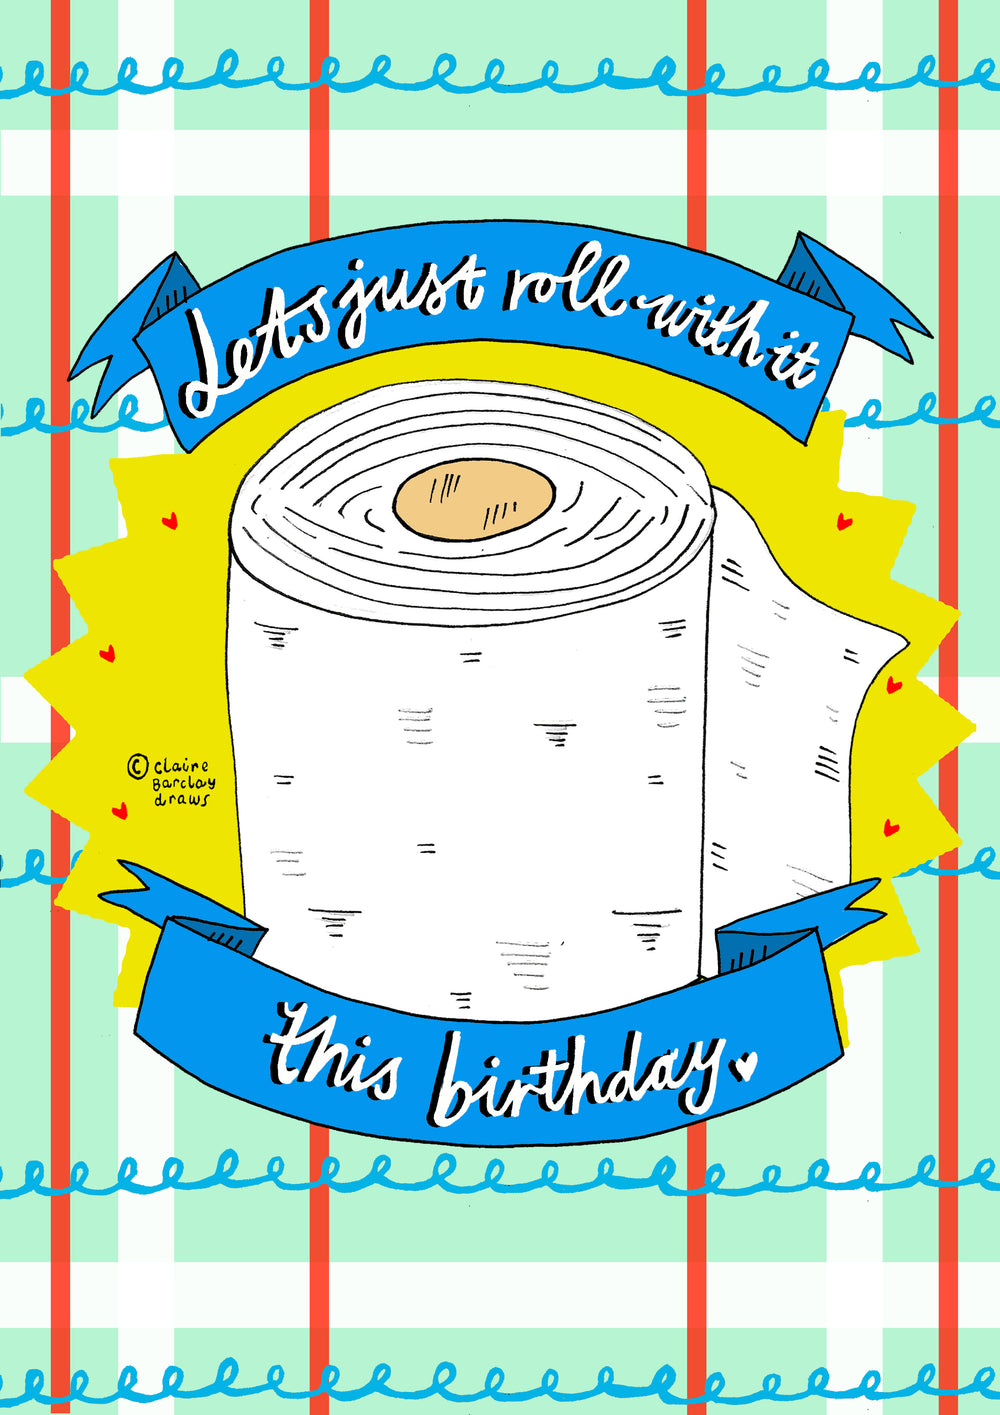 Let's just roll with it this Birthday....! Greetings Card